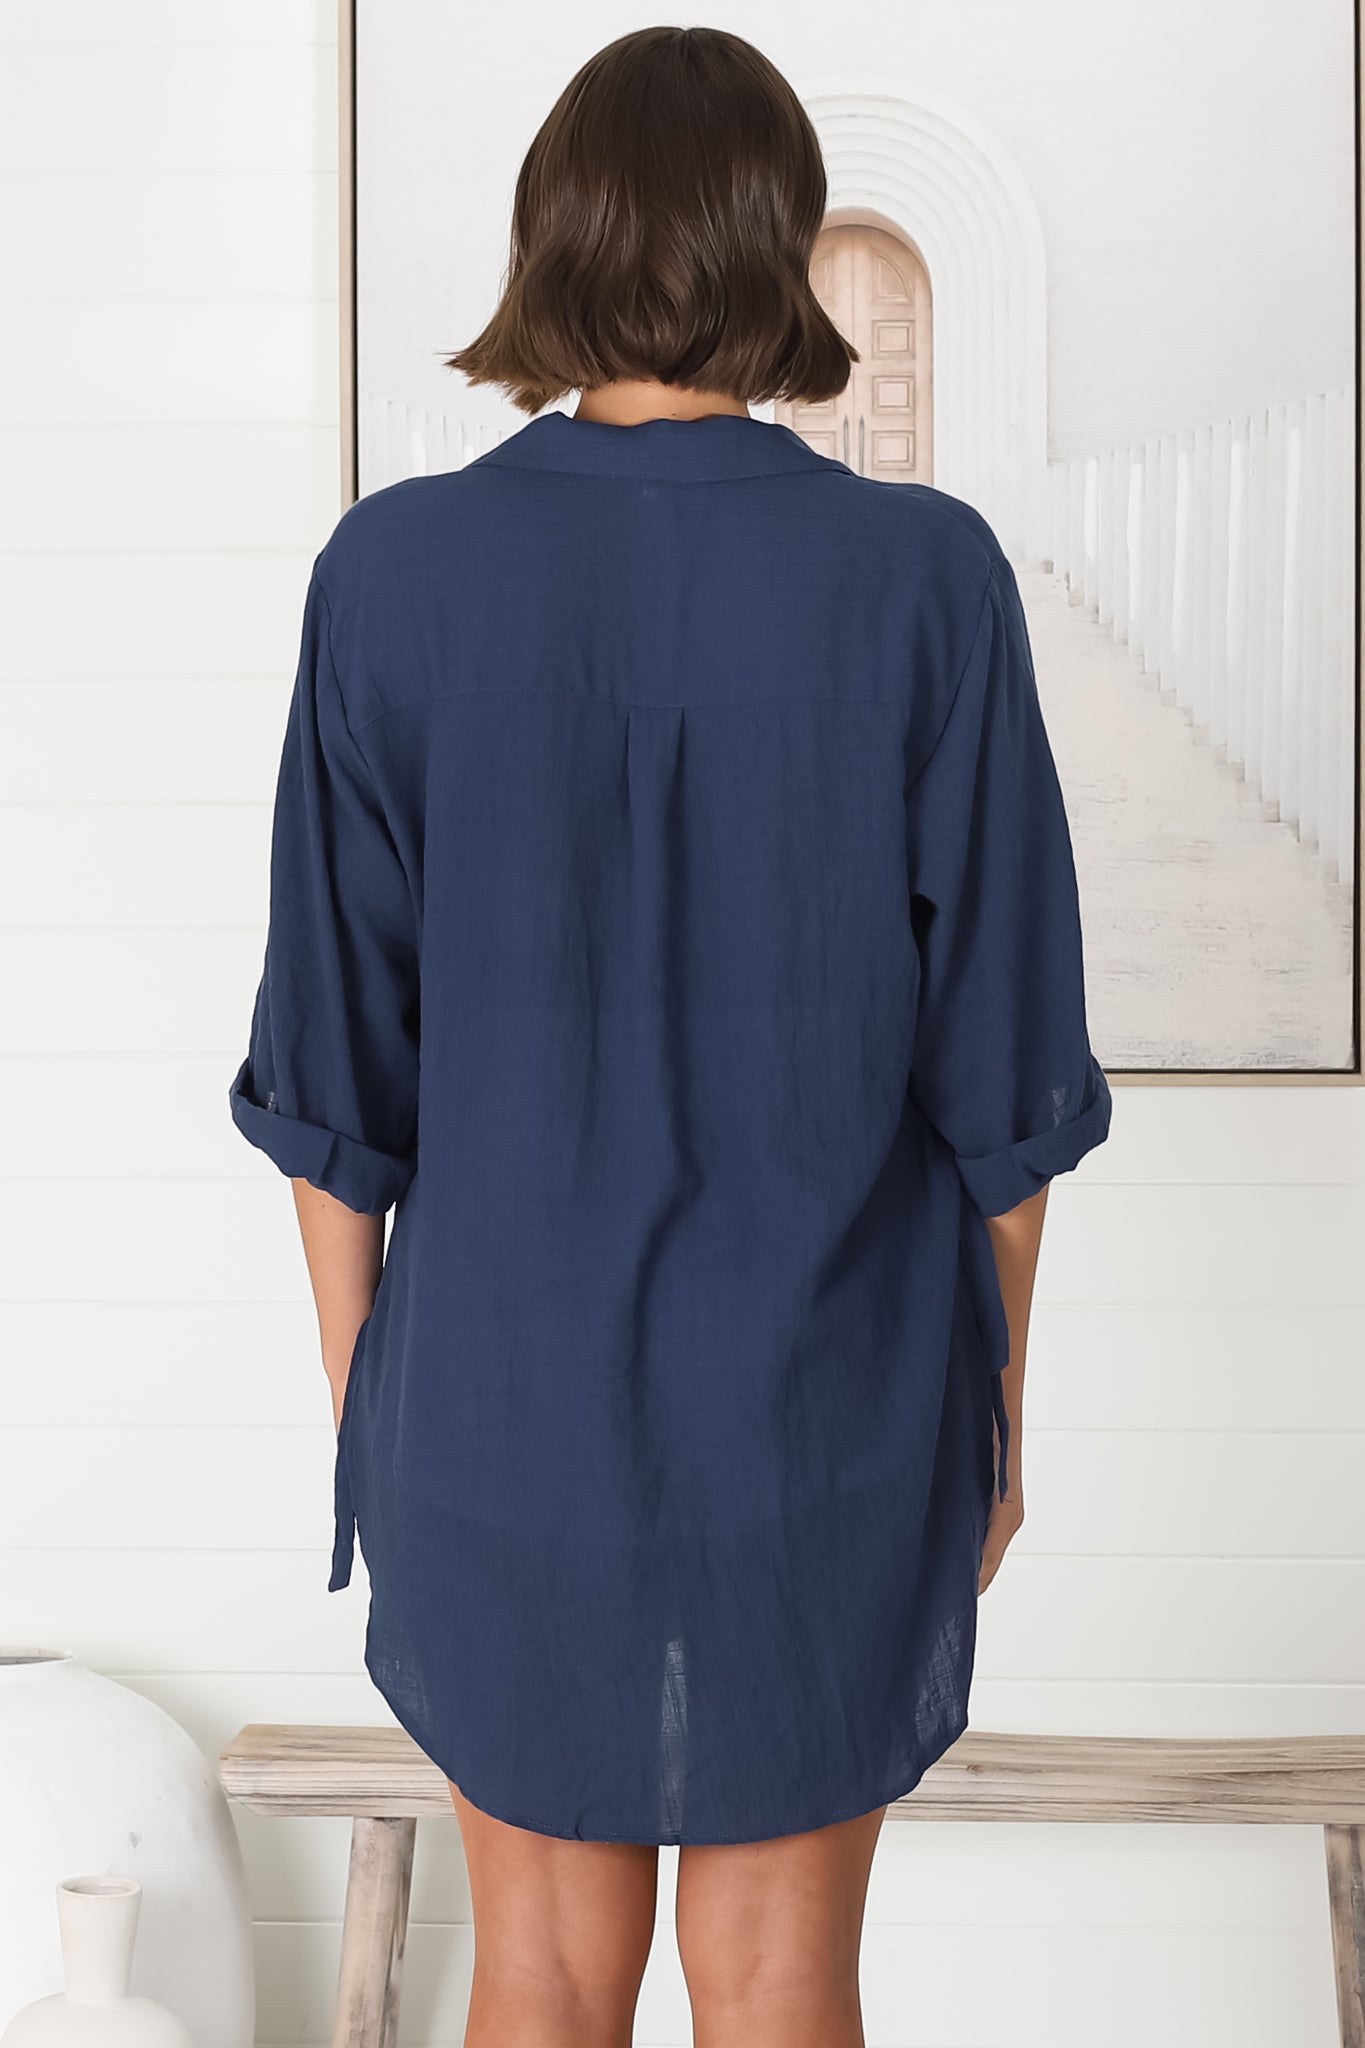 Beachly Shirt - Folded Collar Button Down Relaxed Shirt In Navy